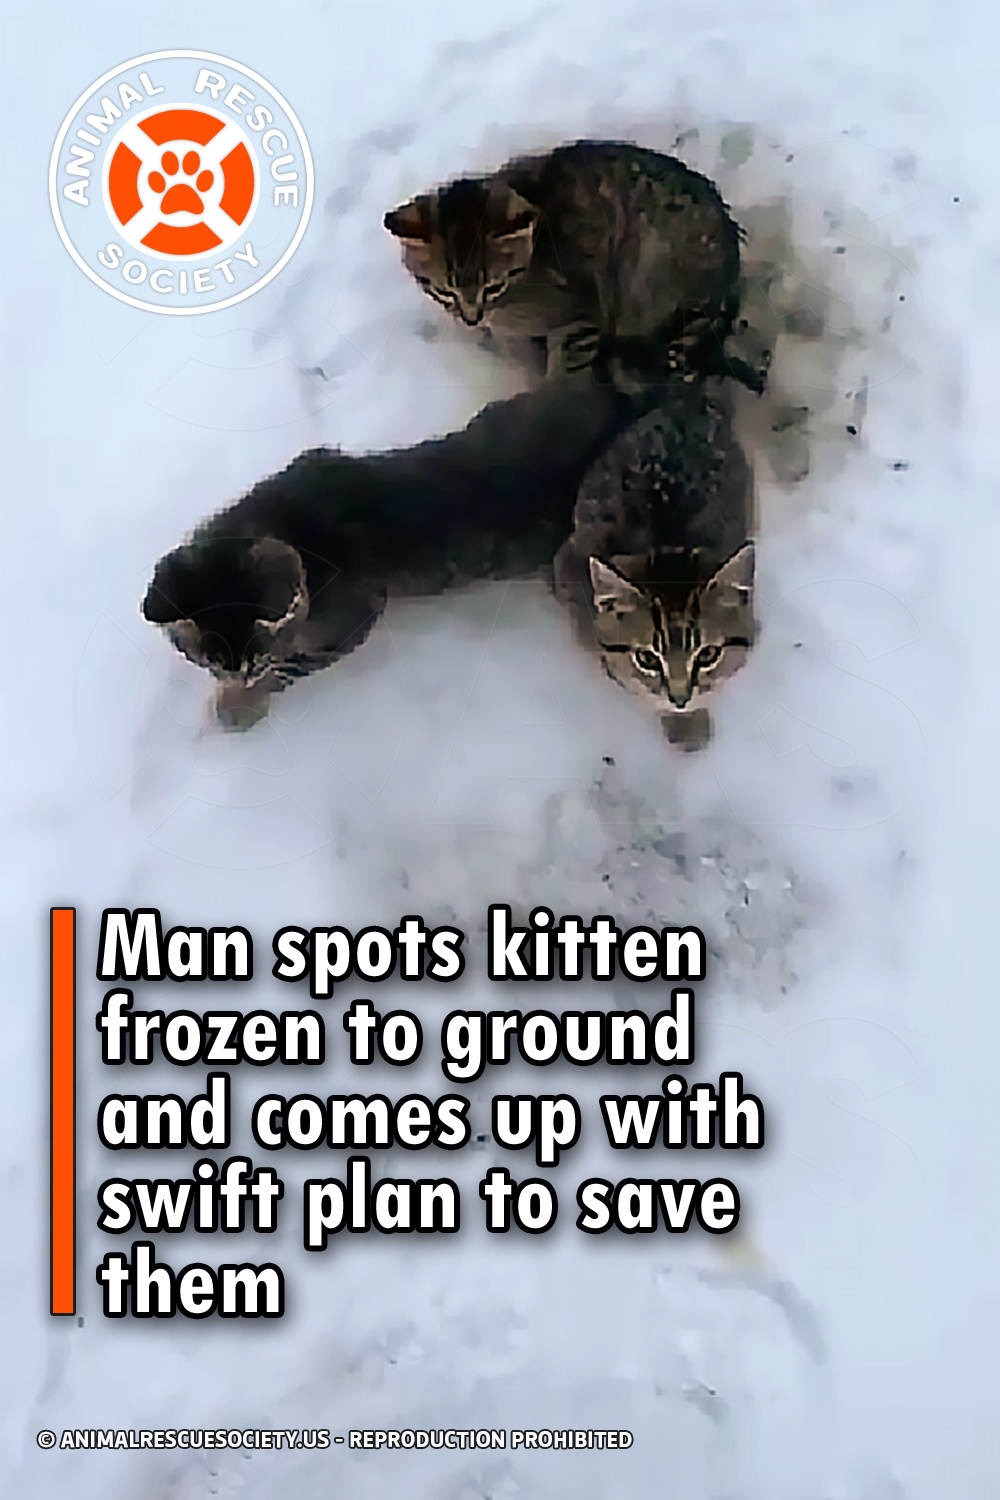 Man spots kitten frozen to ground and comes up with swift plan to save them